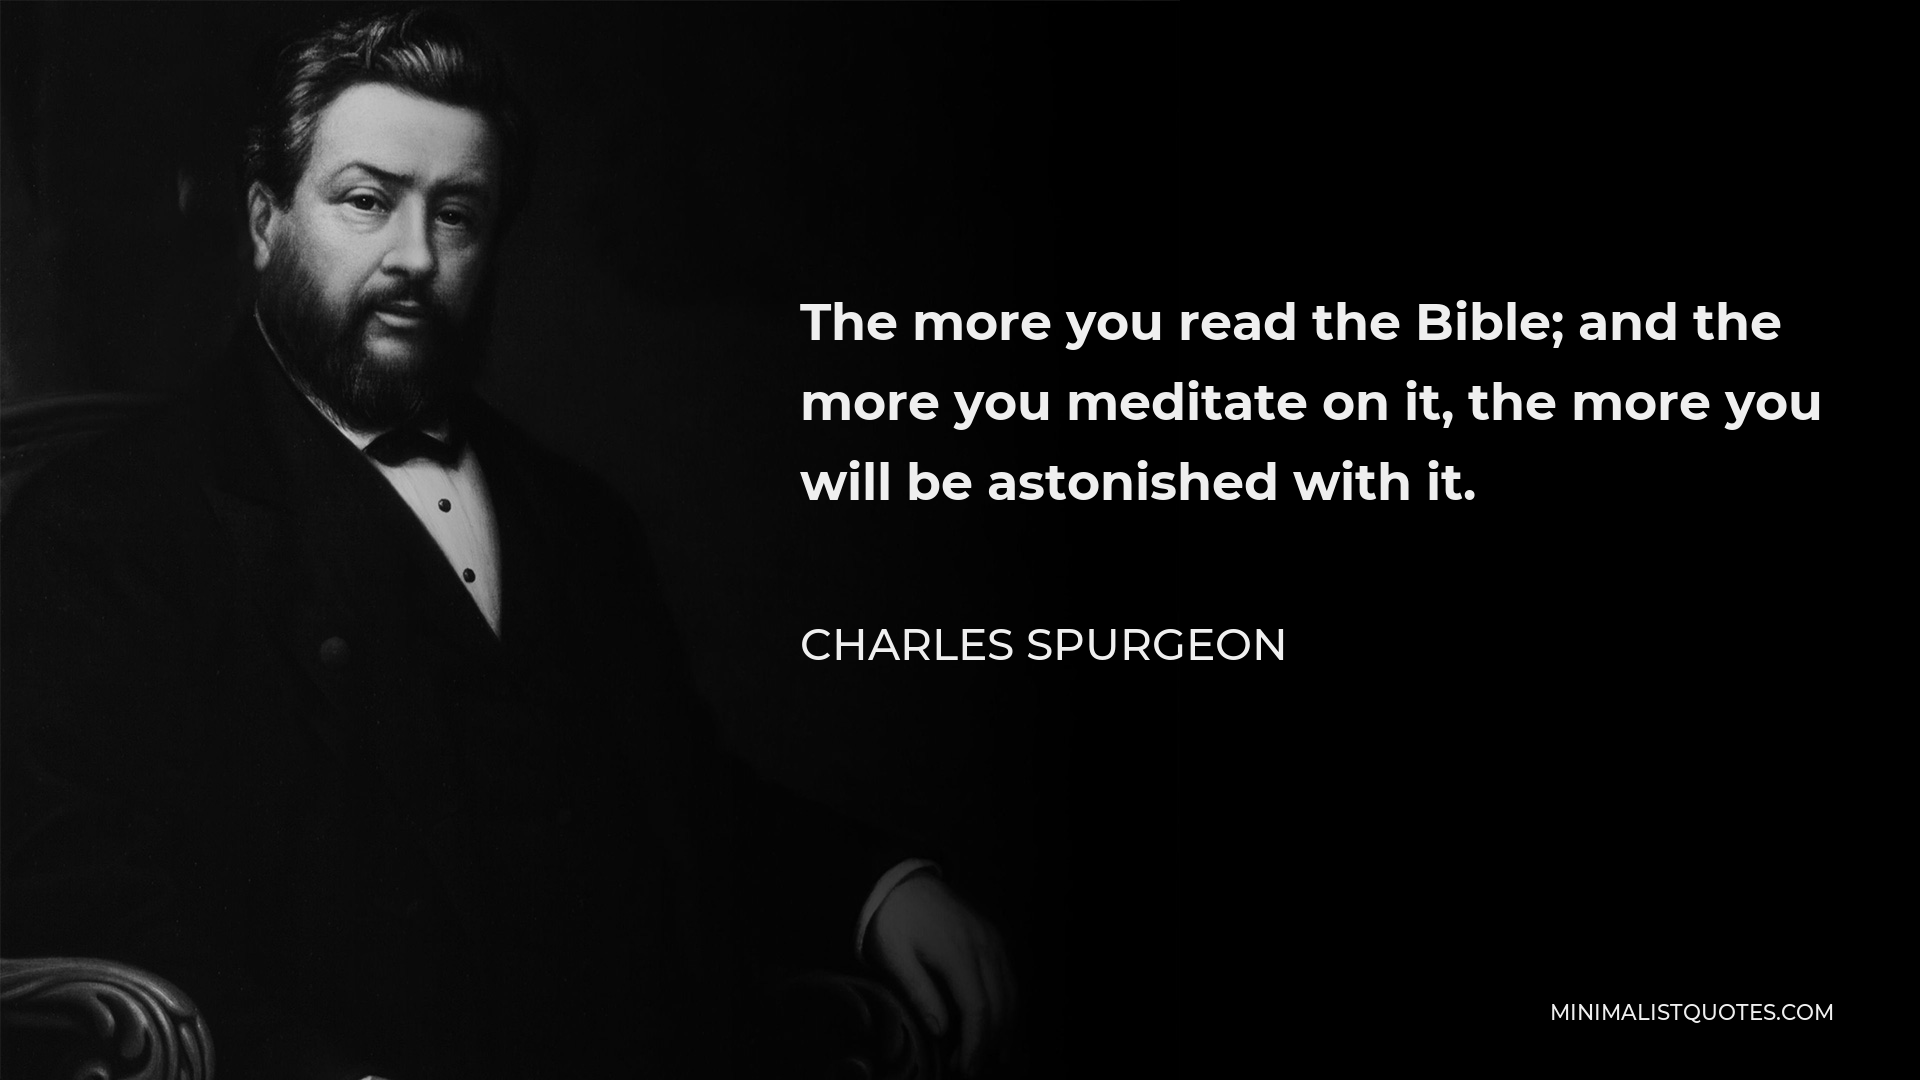 Charles Spurgeon Quote - The more you read the Bible; and the more you meditate on it, the more you will be astonished with it.